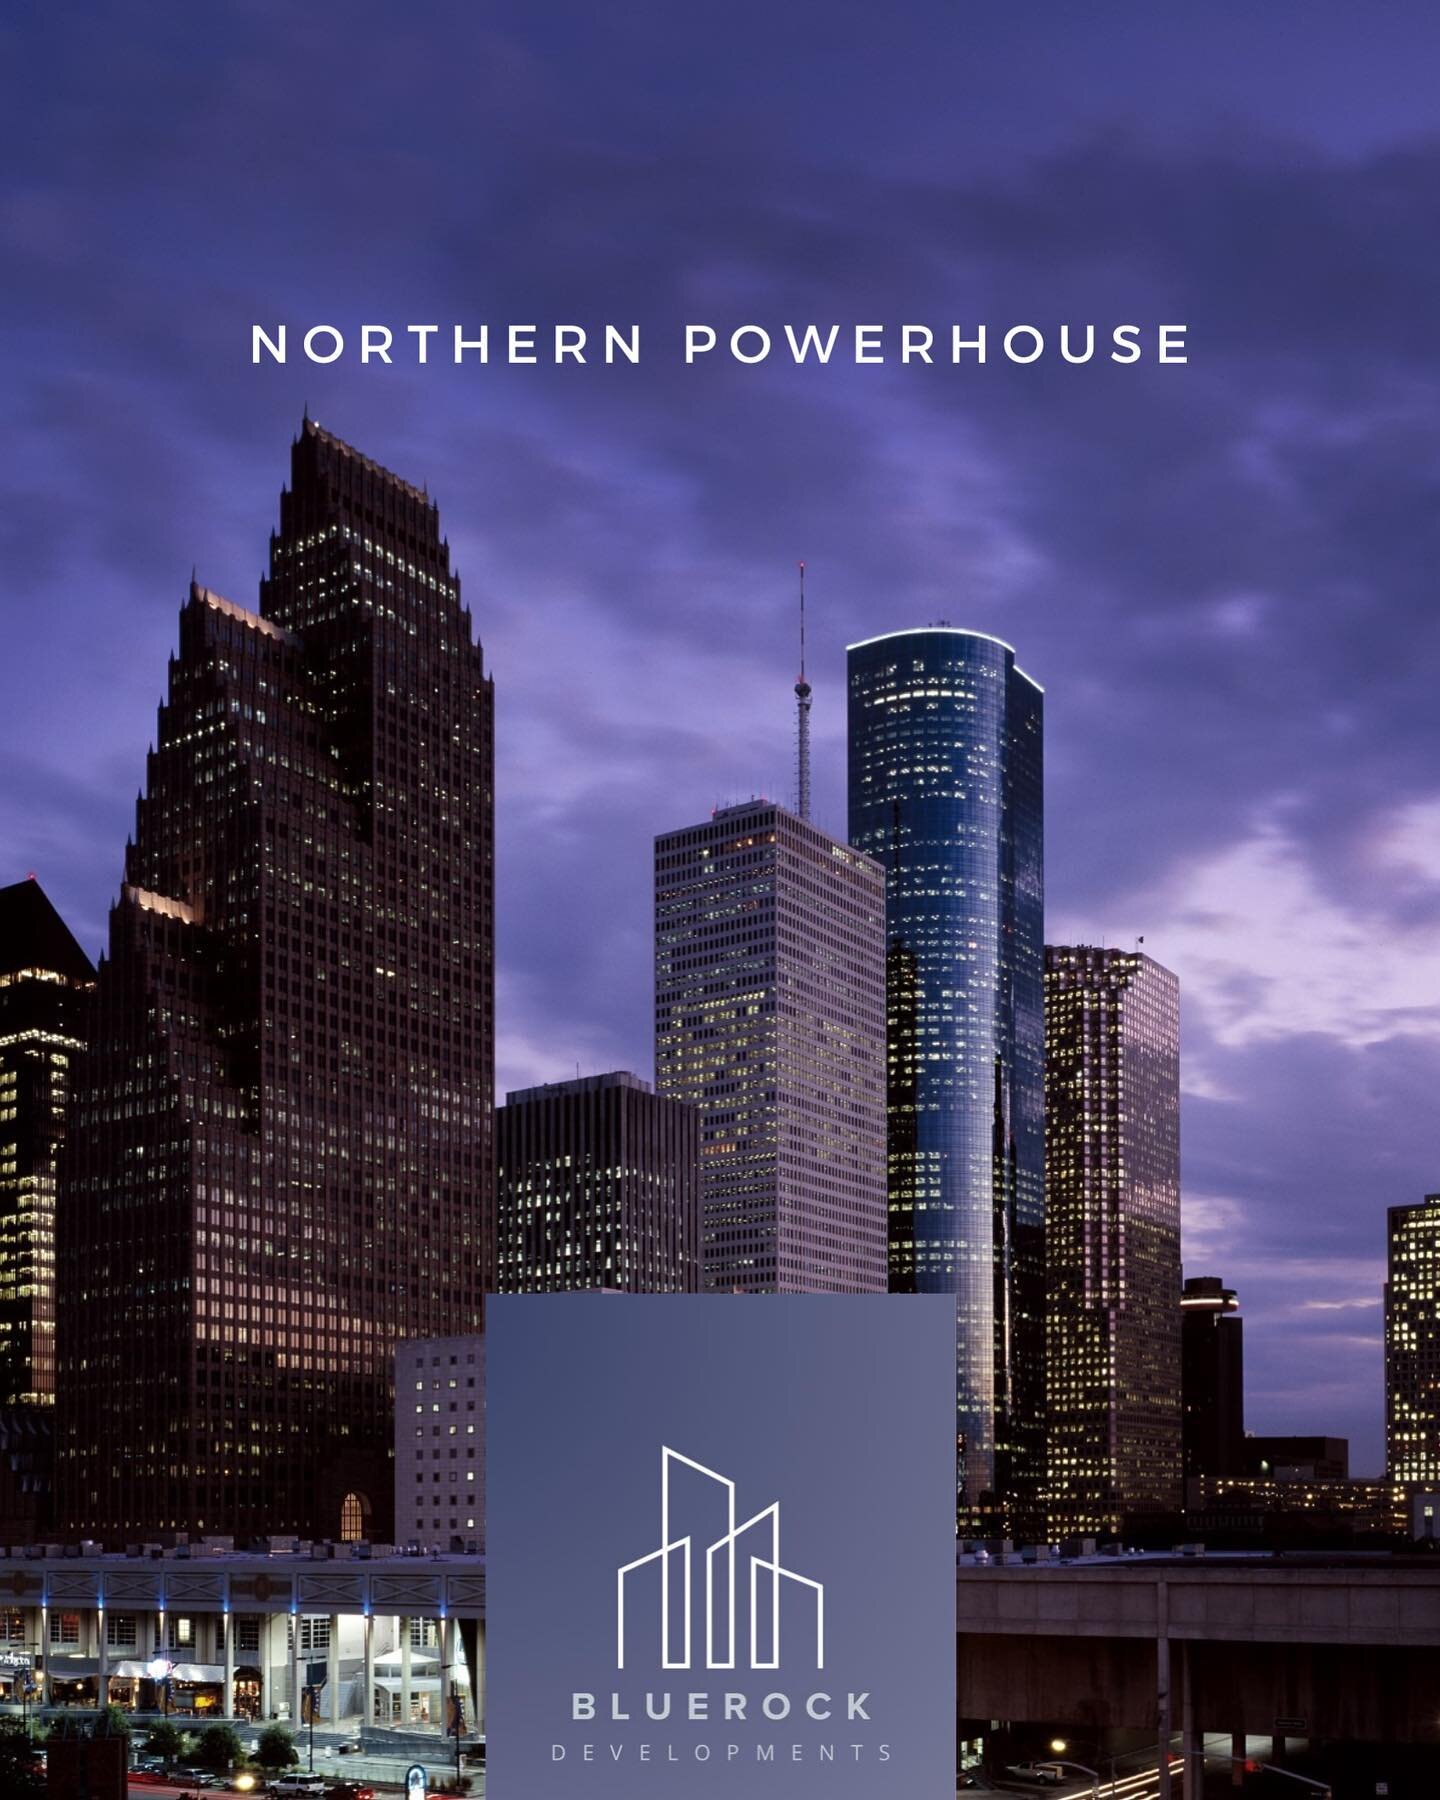 WHAT IS THE NORTHERN POWERHOUSE?

The Northern Powerhouse is the government&rsquo;s vision for a super-connected, globally-competitive northern economy with a flourishing private sector, a highly-skilled population, and world-renowned civic and busin